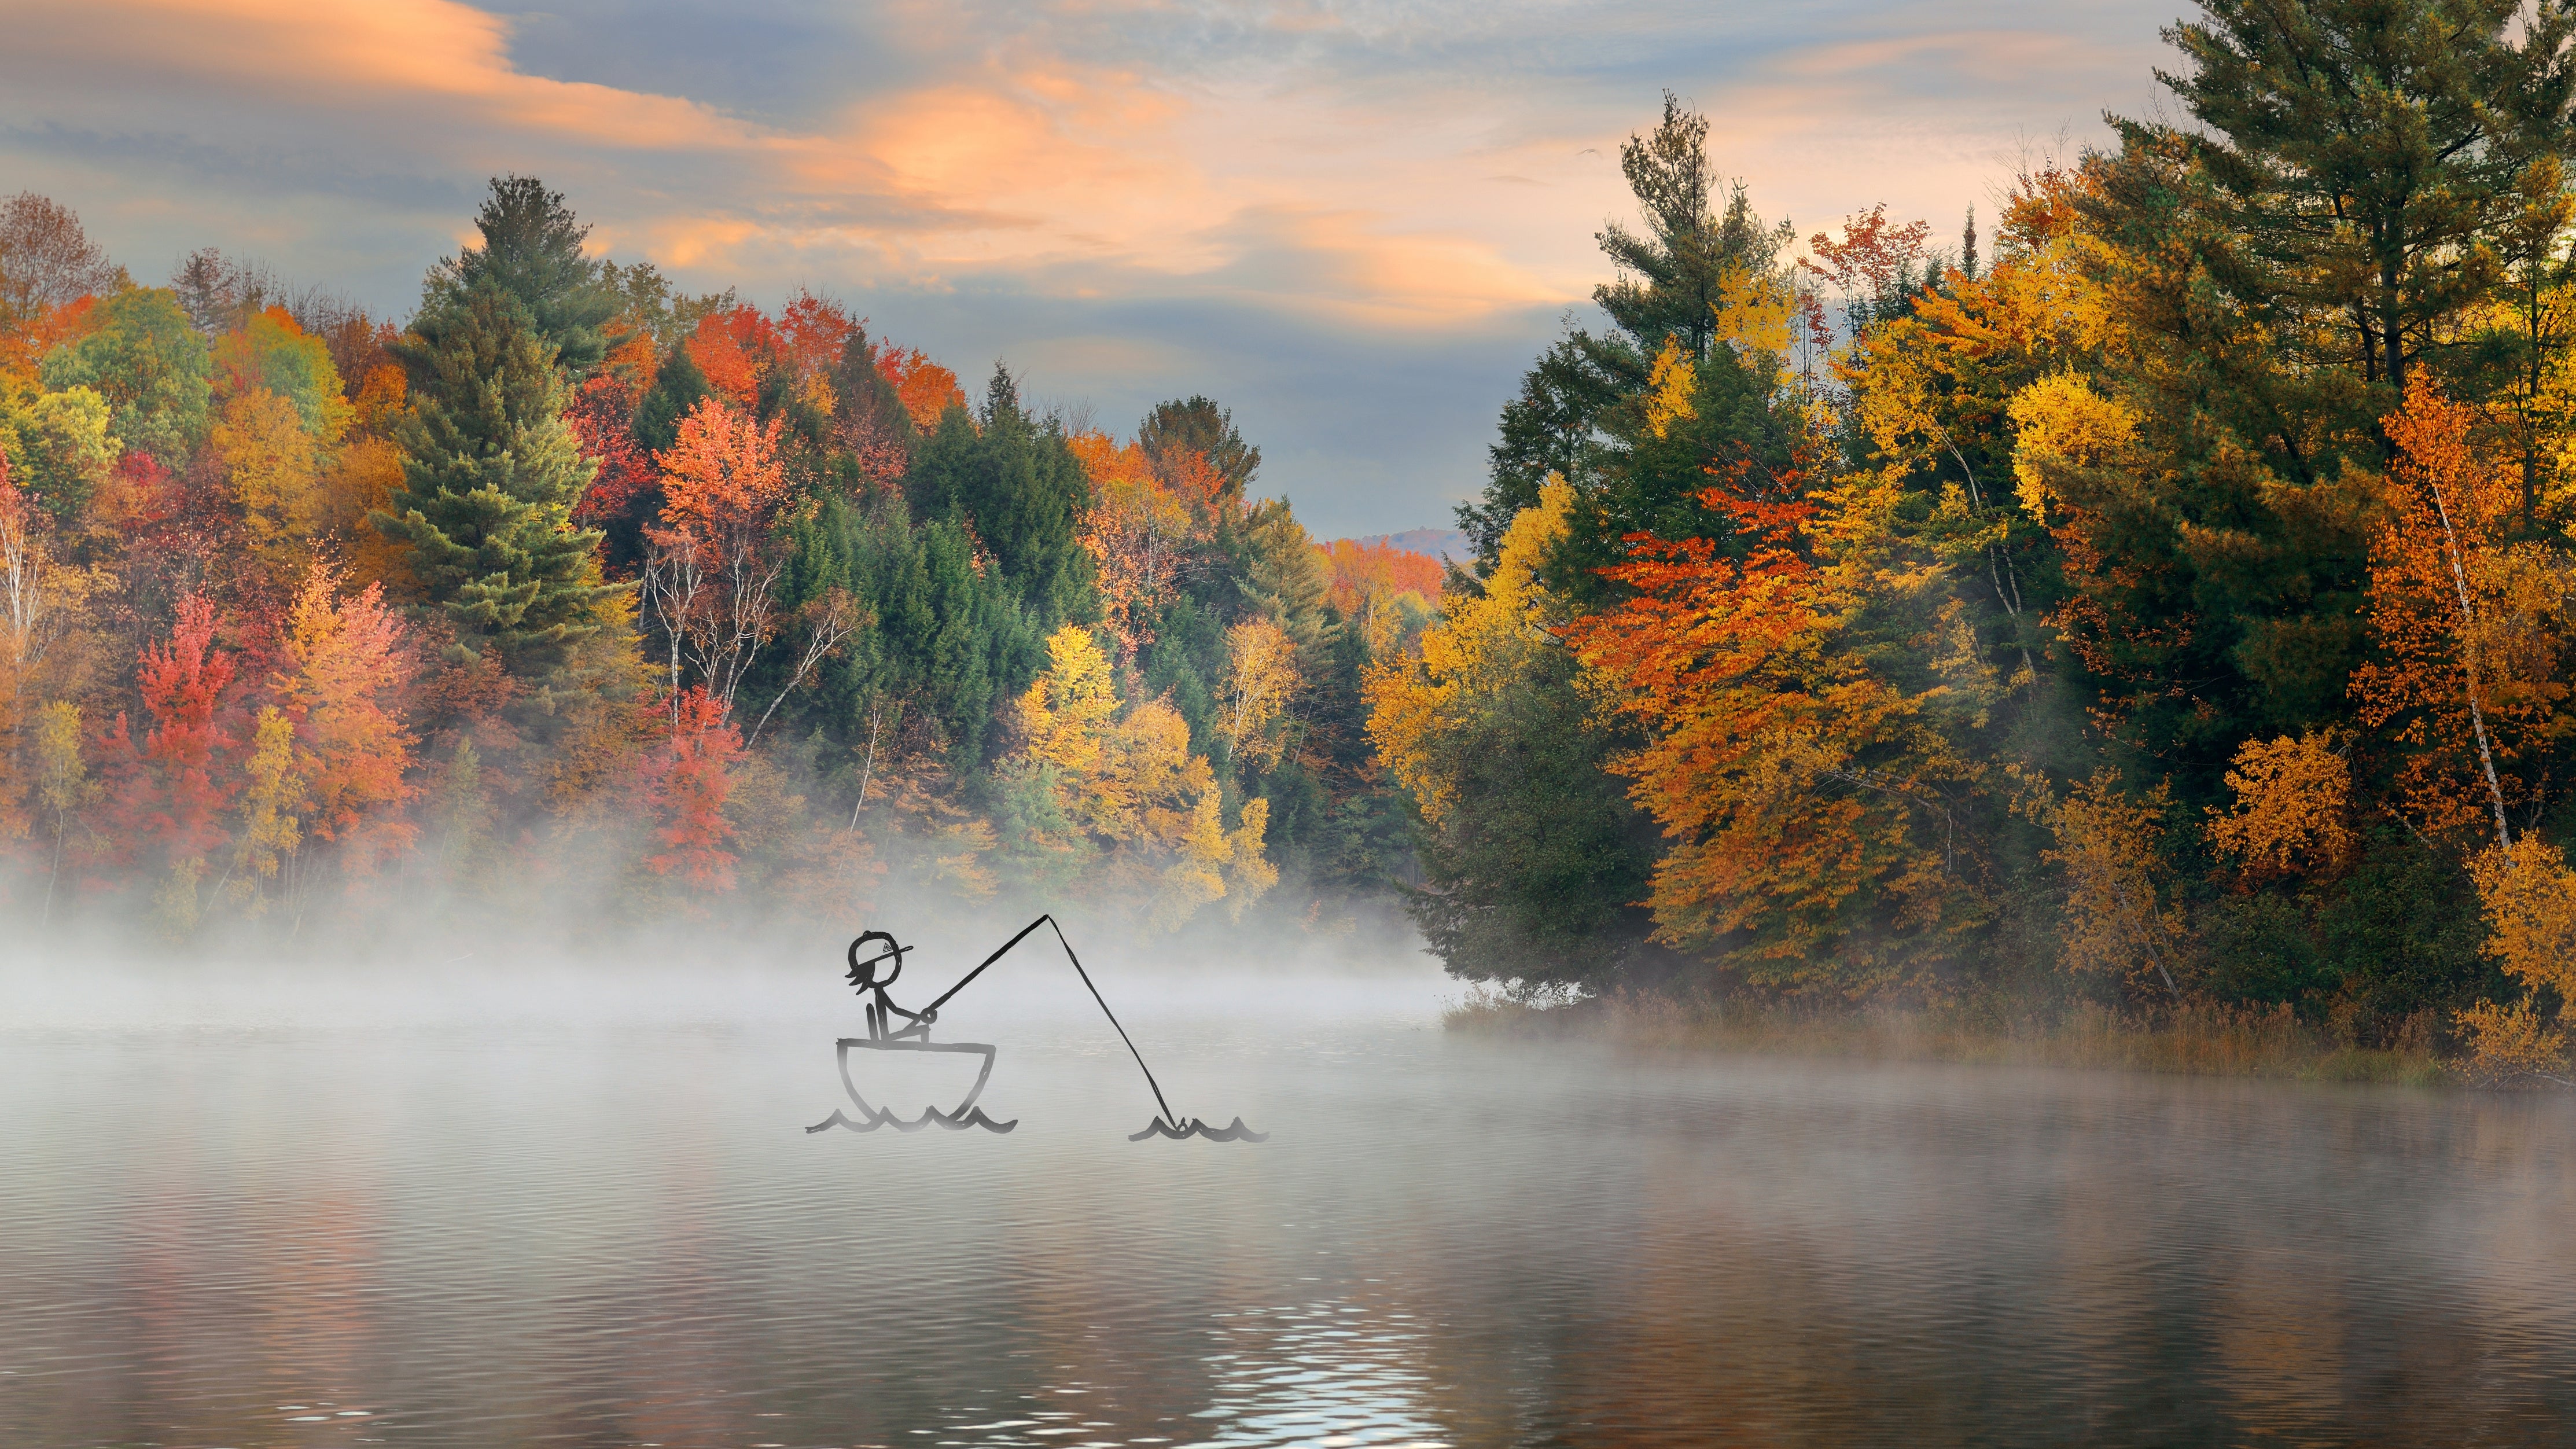 Stix, BeAlive's adventurous character is fishing in the foreground of a vibrant lake with trees changing color and a light fog over the water